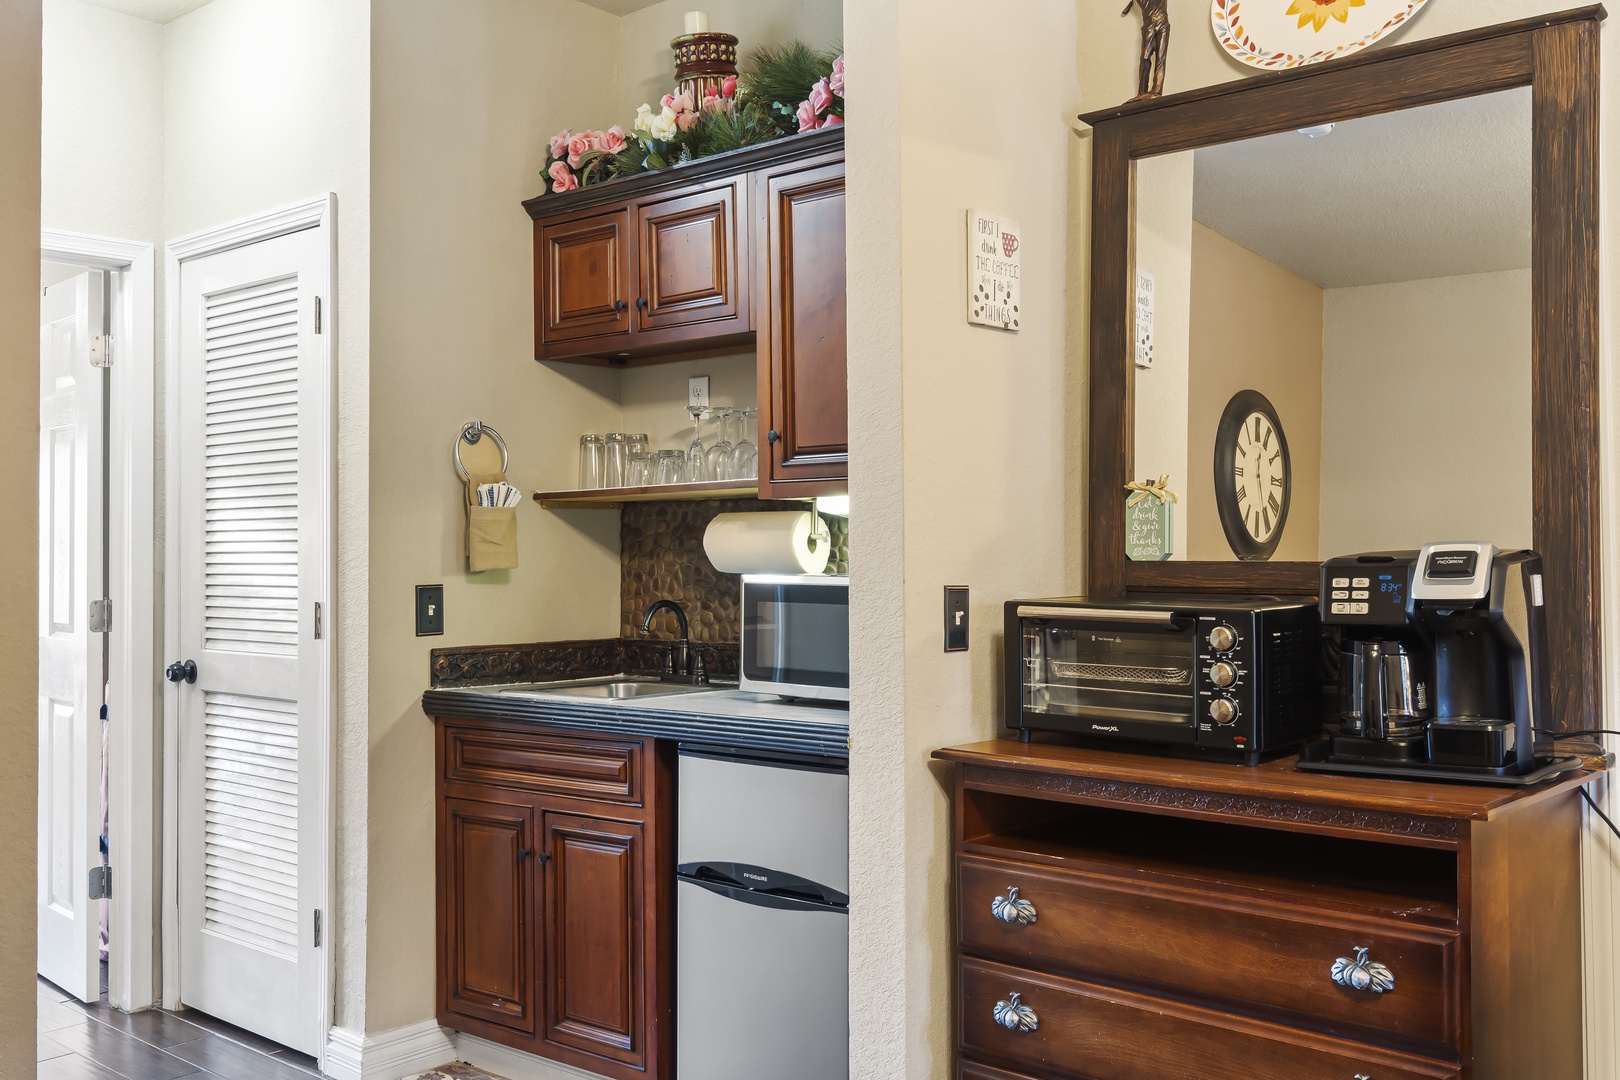 The cozy kitchenette offers all the comforts of home